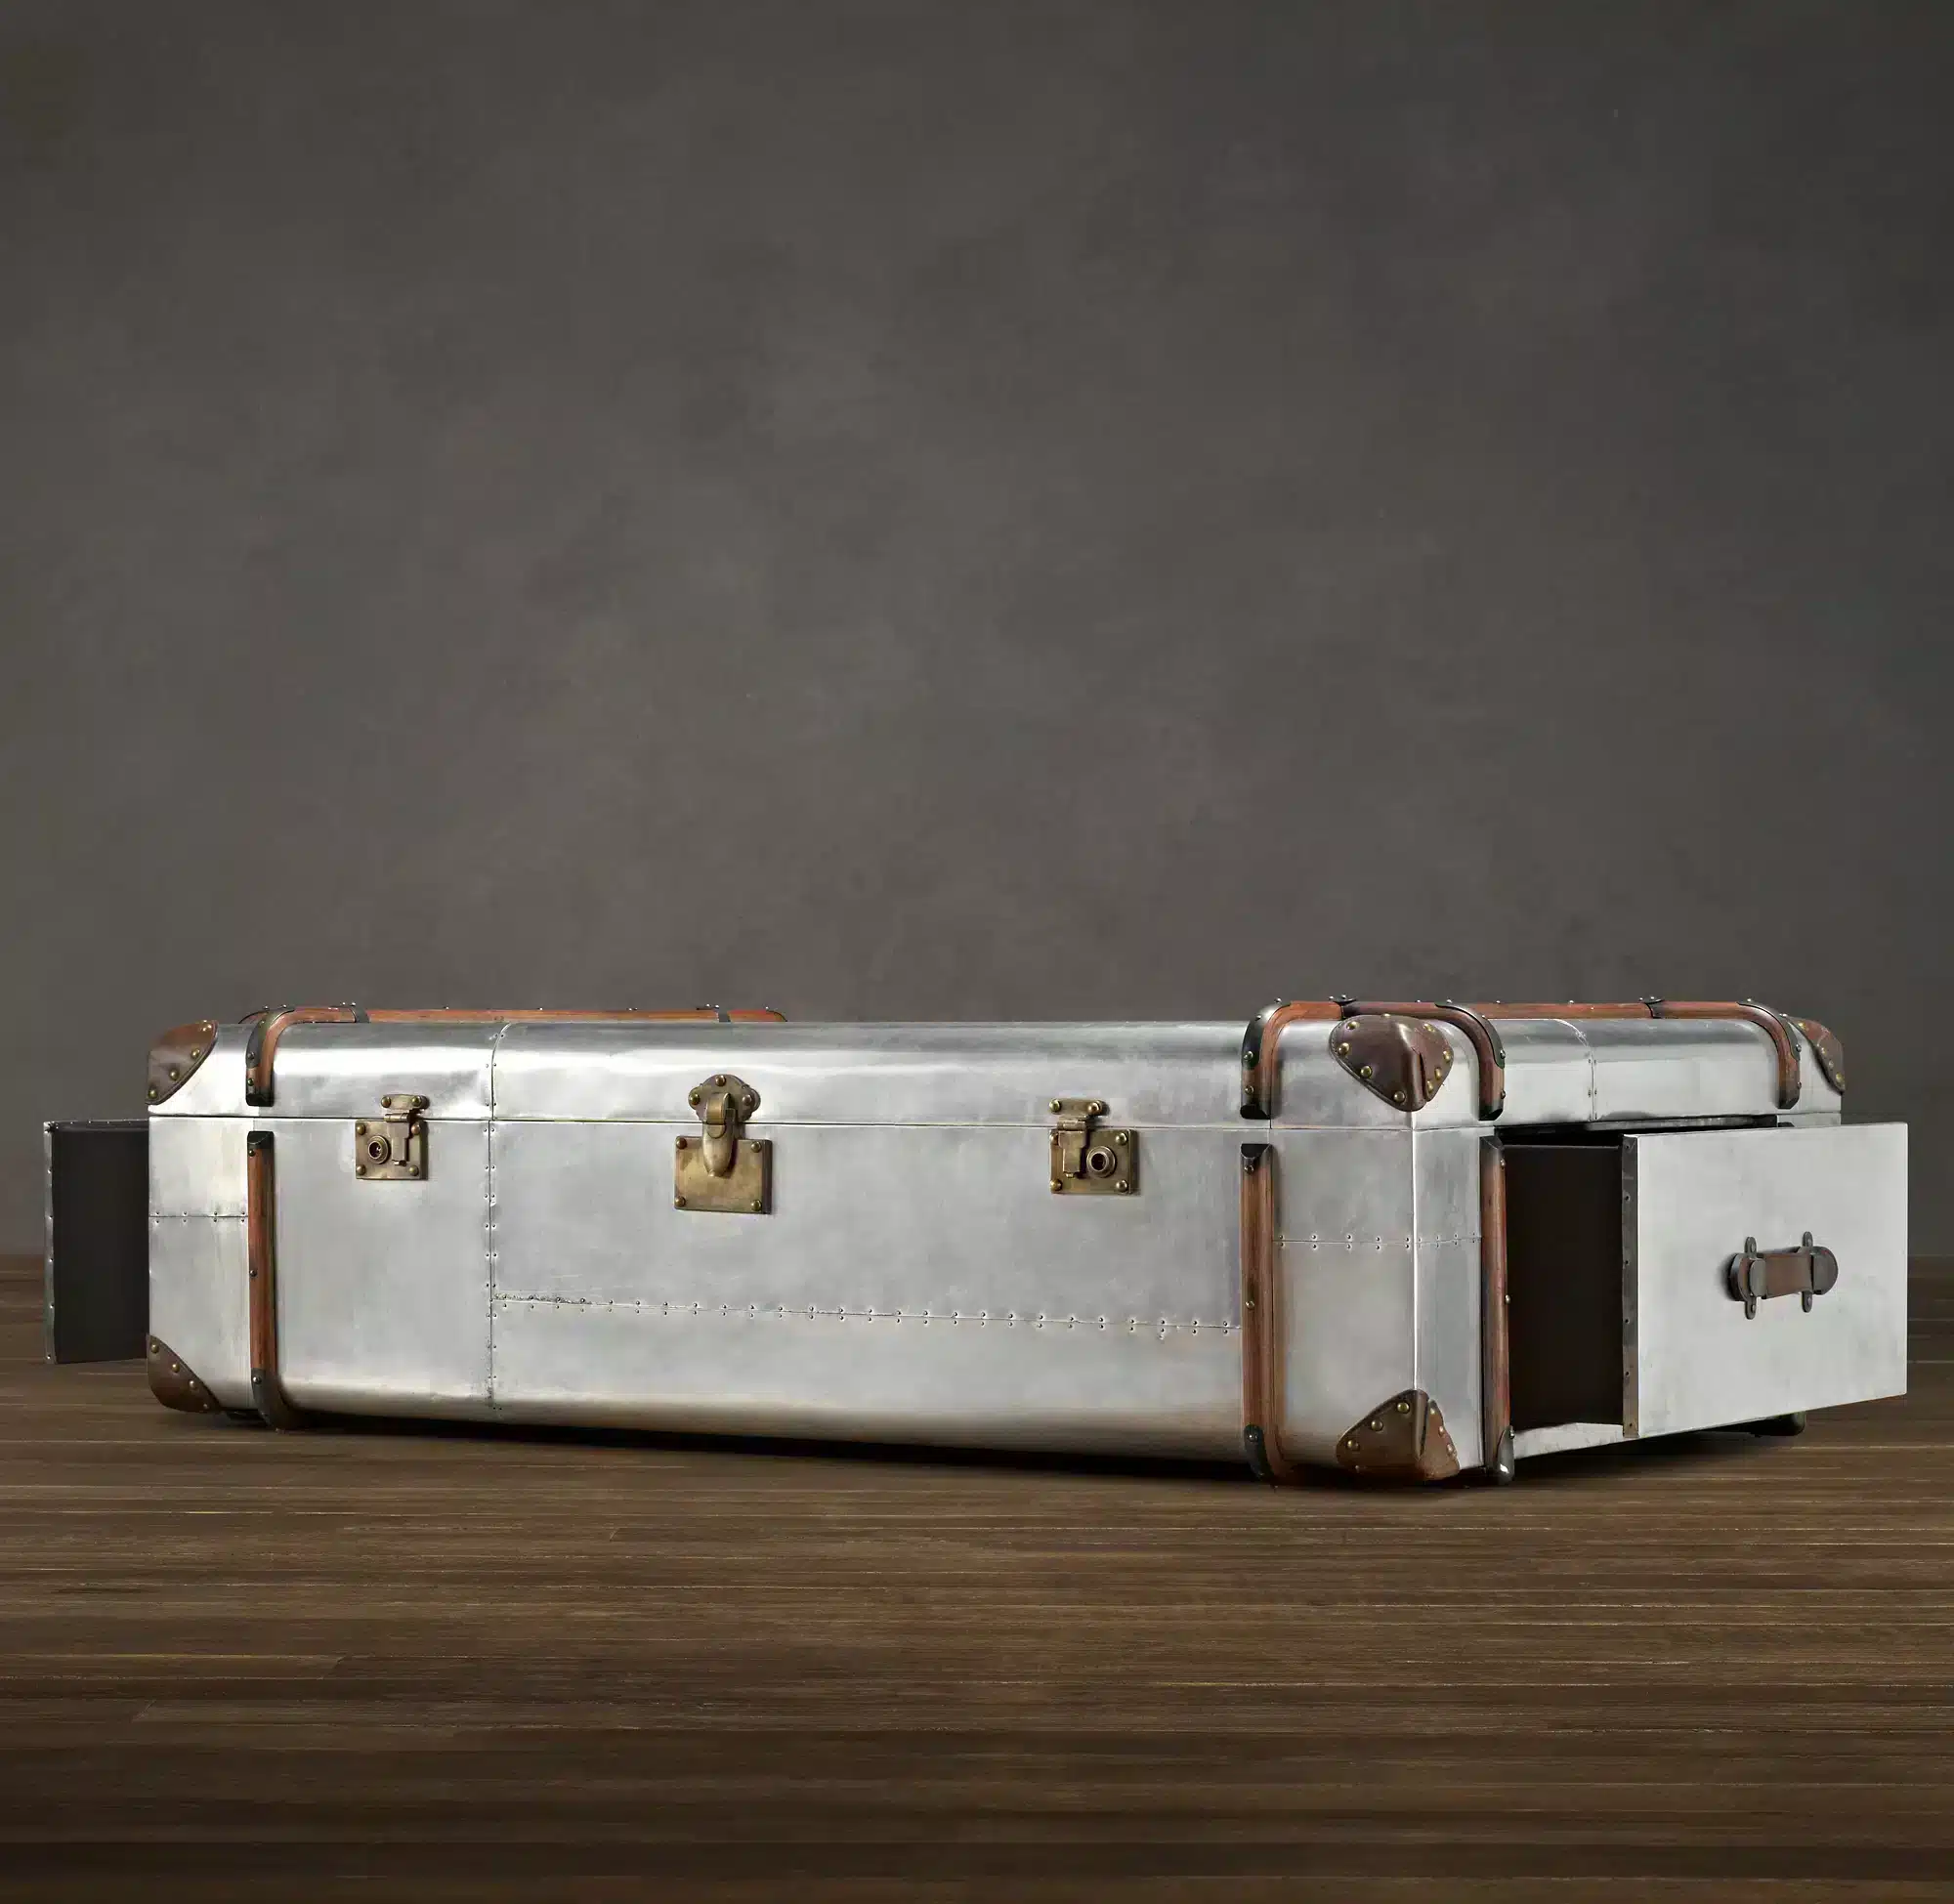 The aviator trunk coffee table is inspired by a worn, custom-made steamer trunk.